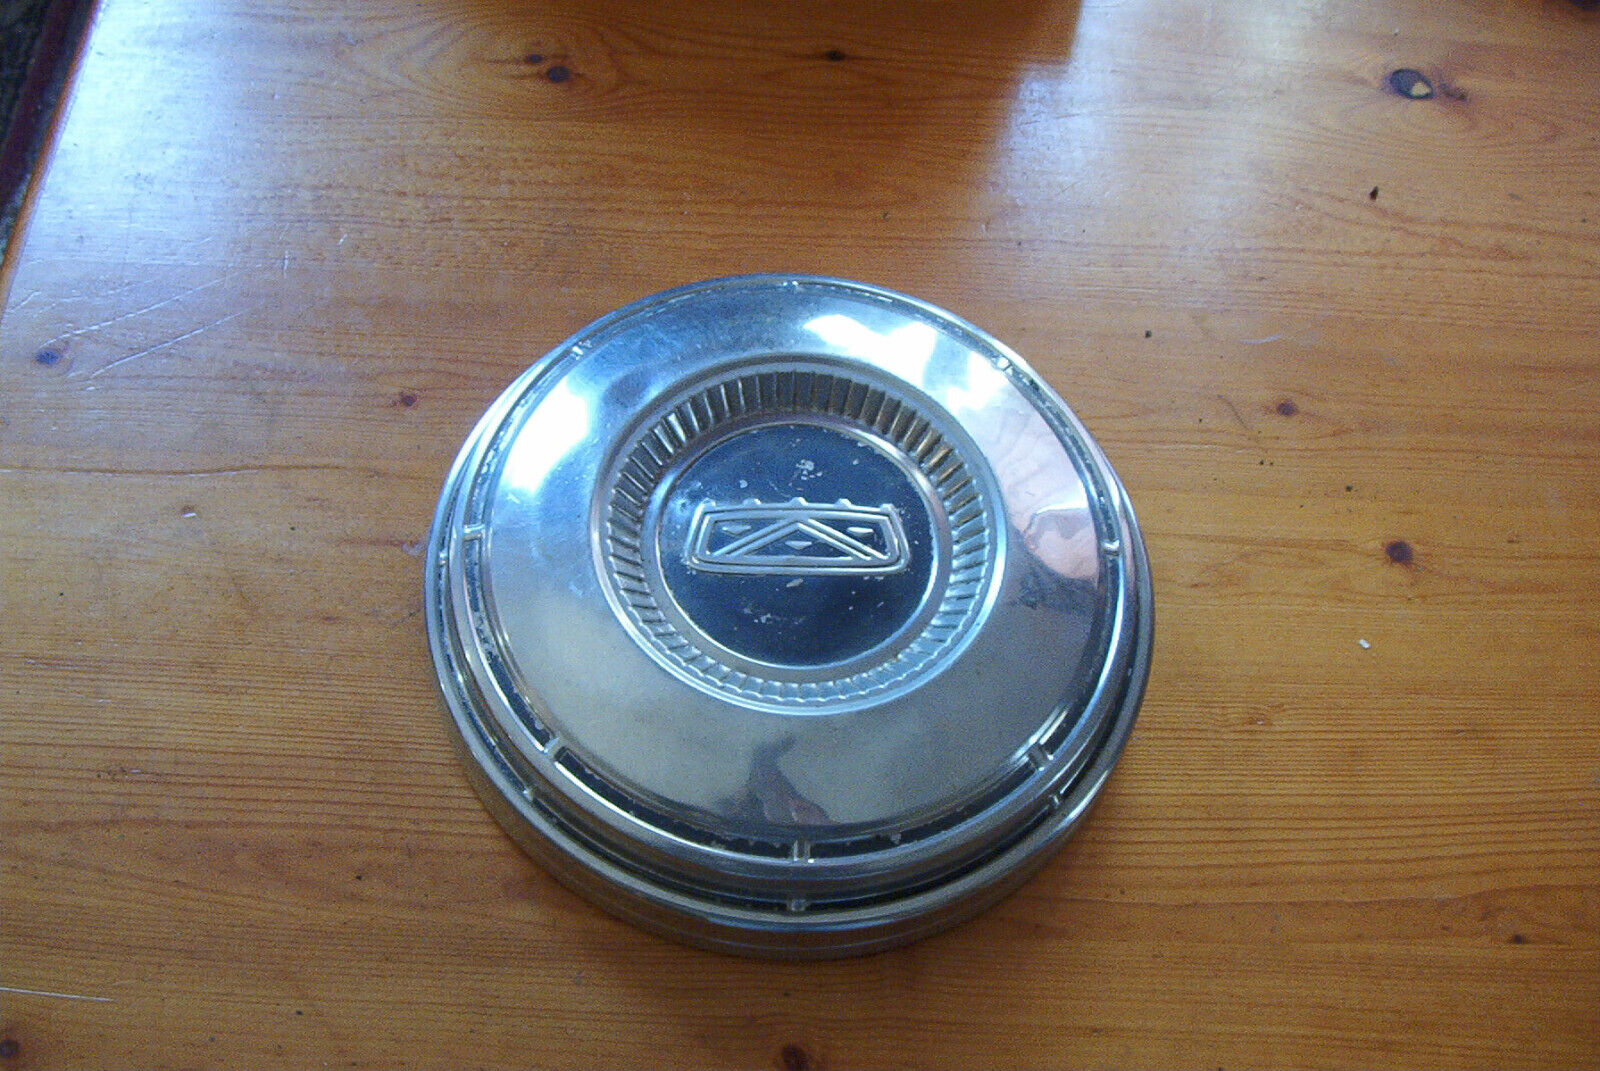 OE vintage 60s/70s Ford Torino/Fairlane 9.5 in dog dish, flawed,still useful